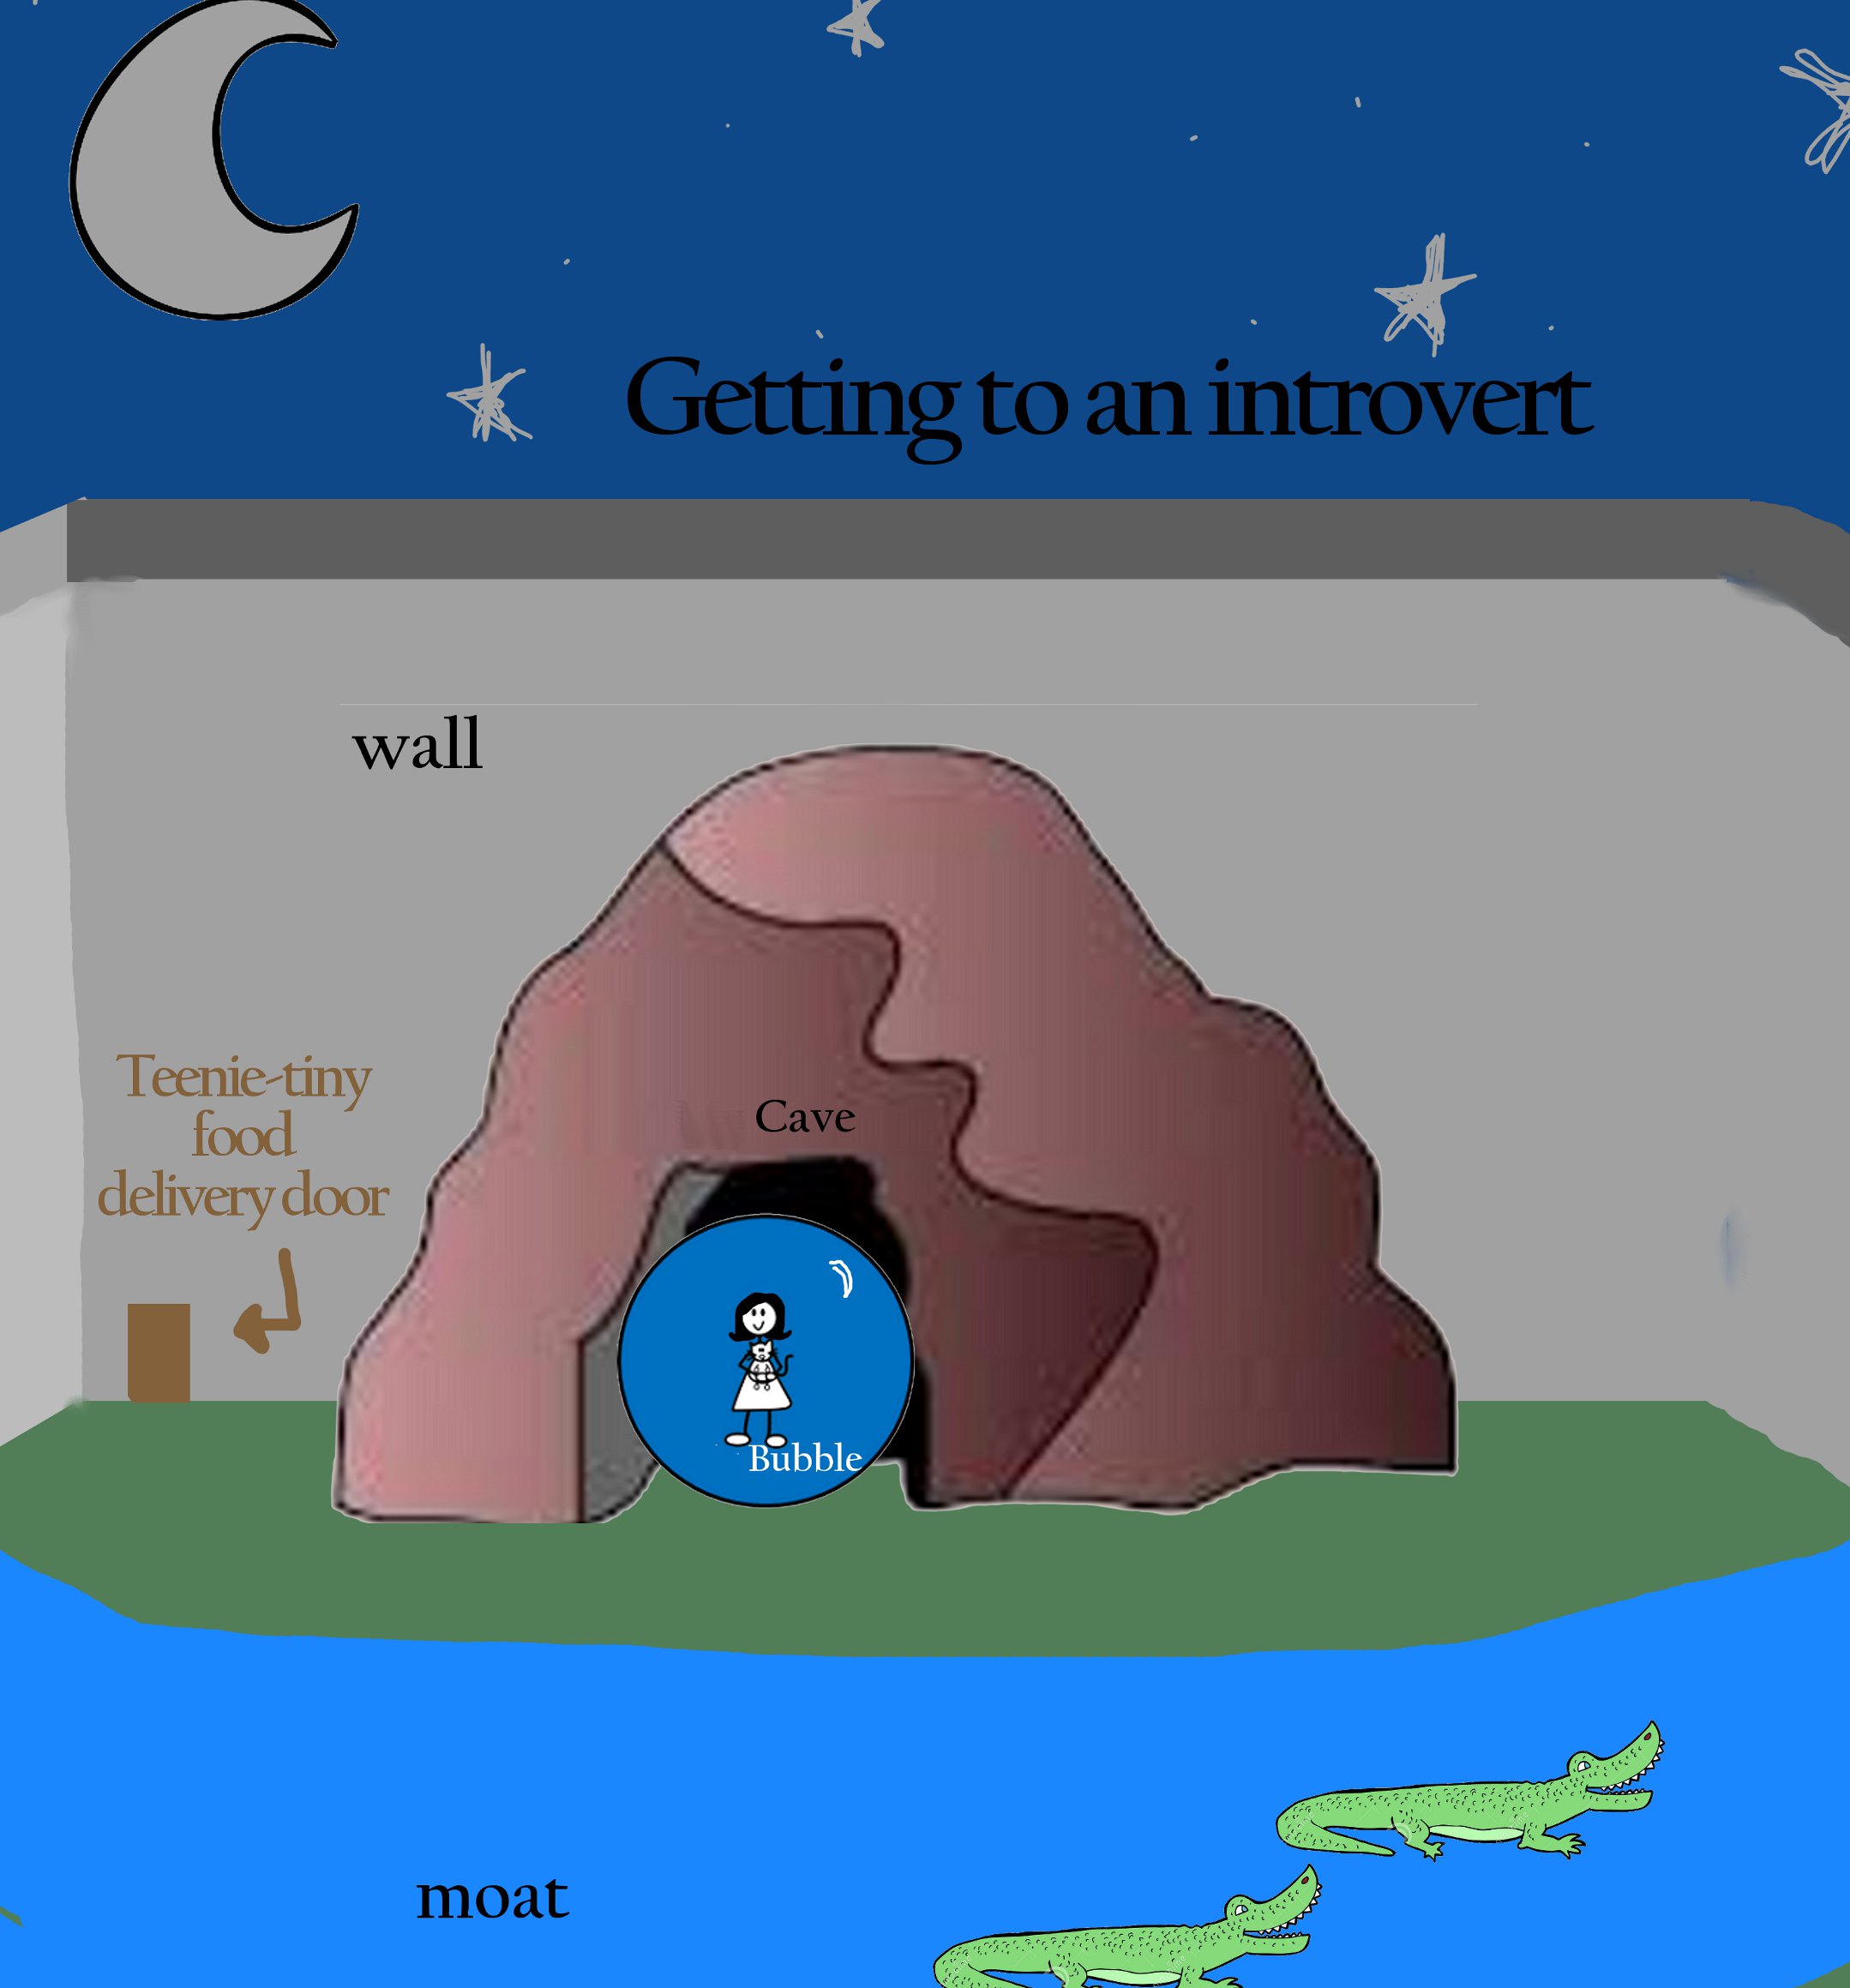 cartoon - Getting to an introvert wall Cave Teenietiny food delivery door Bubble Eco 2014 7.11. Cw moat s on